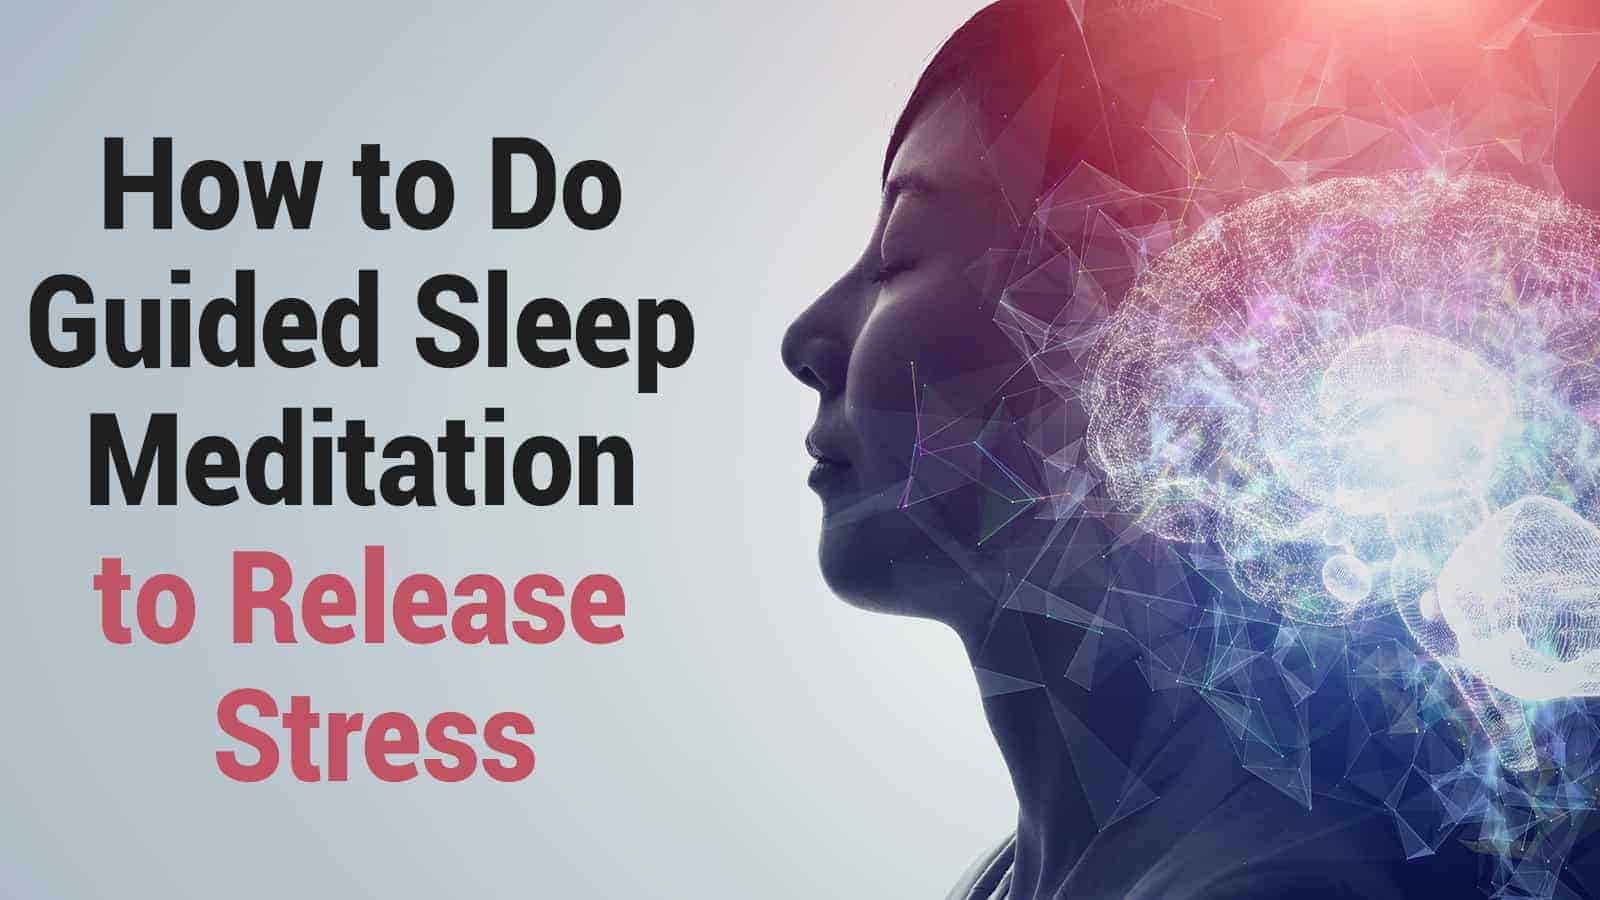 How to Do Guided Sleep Meditation to Release Stress